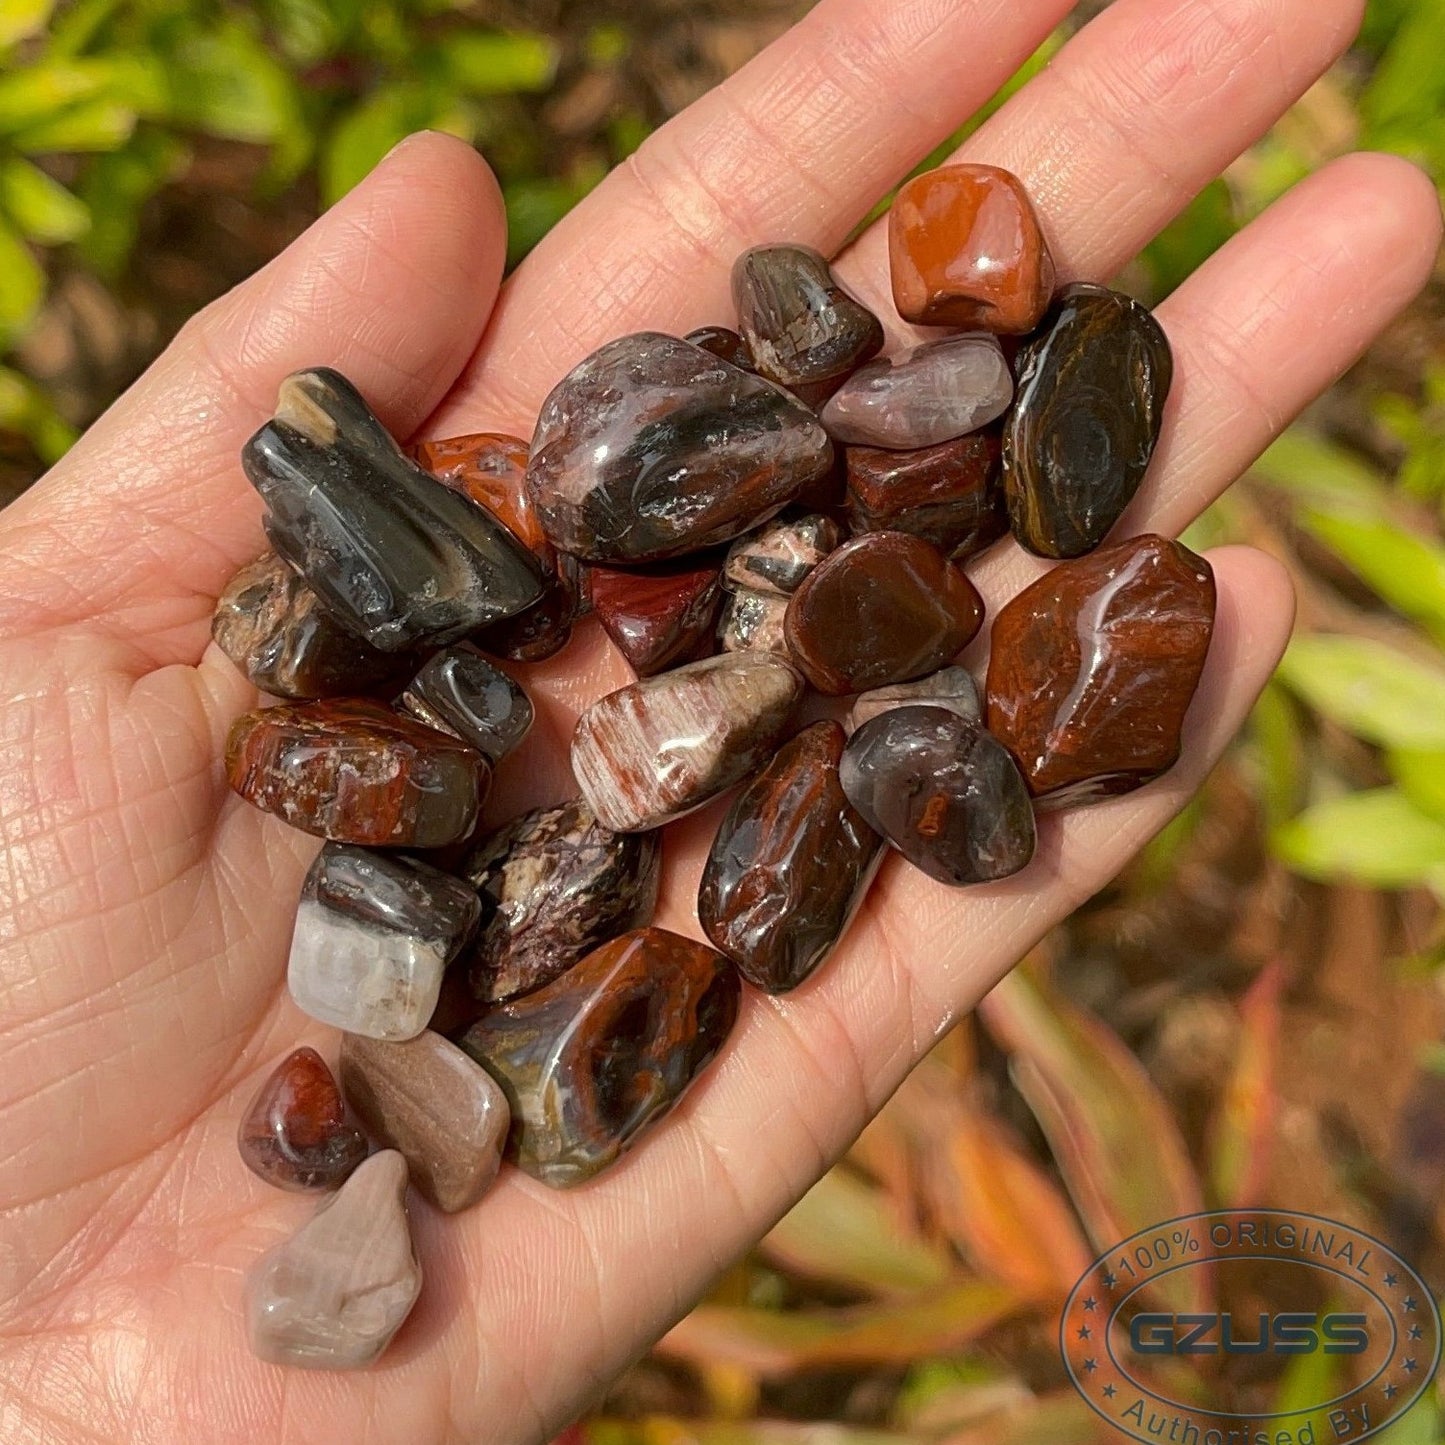 Petrified Wood Stone Petrified Wood Tumbled Stones - Mineral Specimen - Fossilized Wood - Healing Crystals and Stones